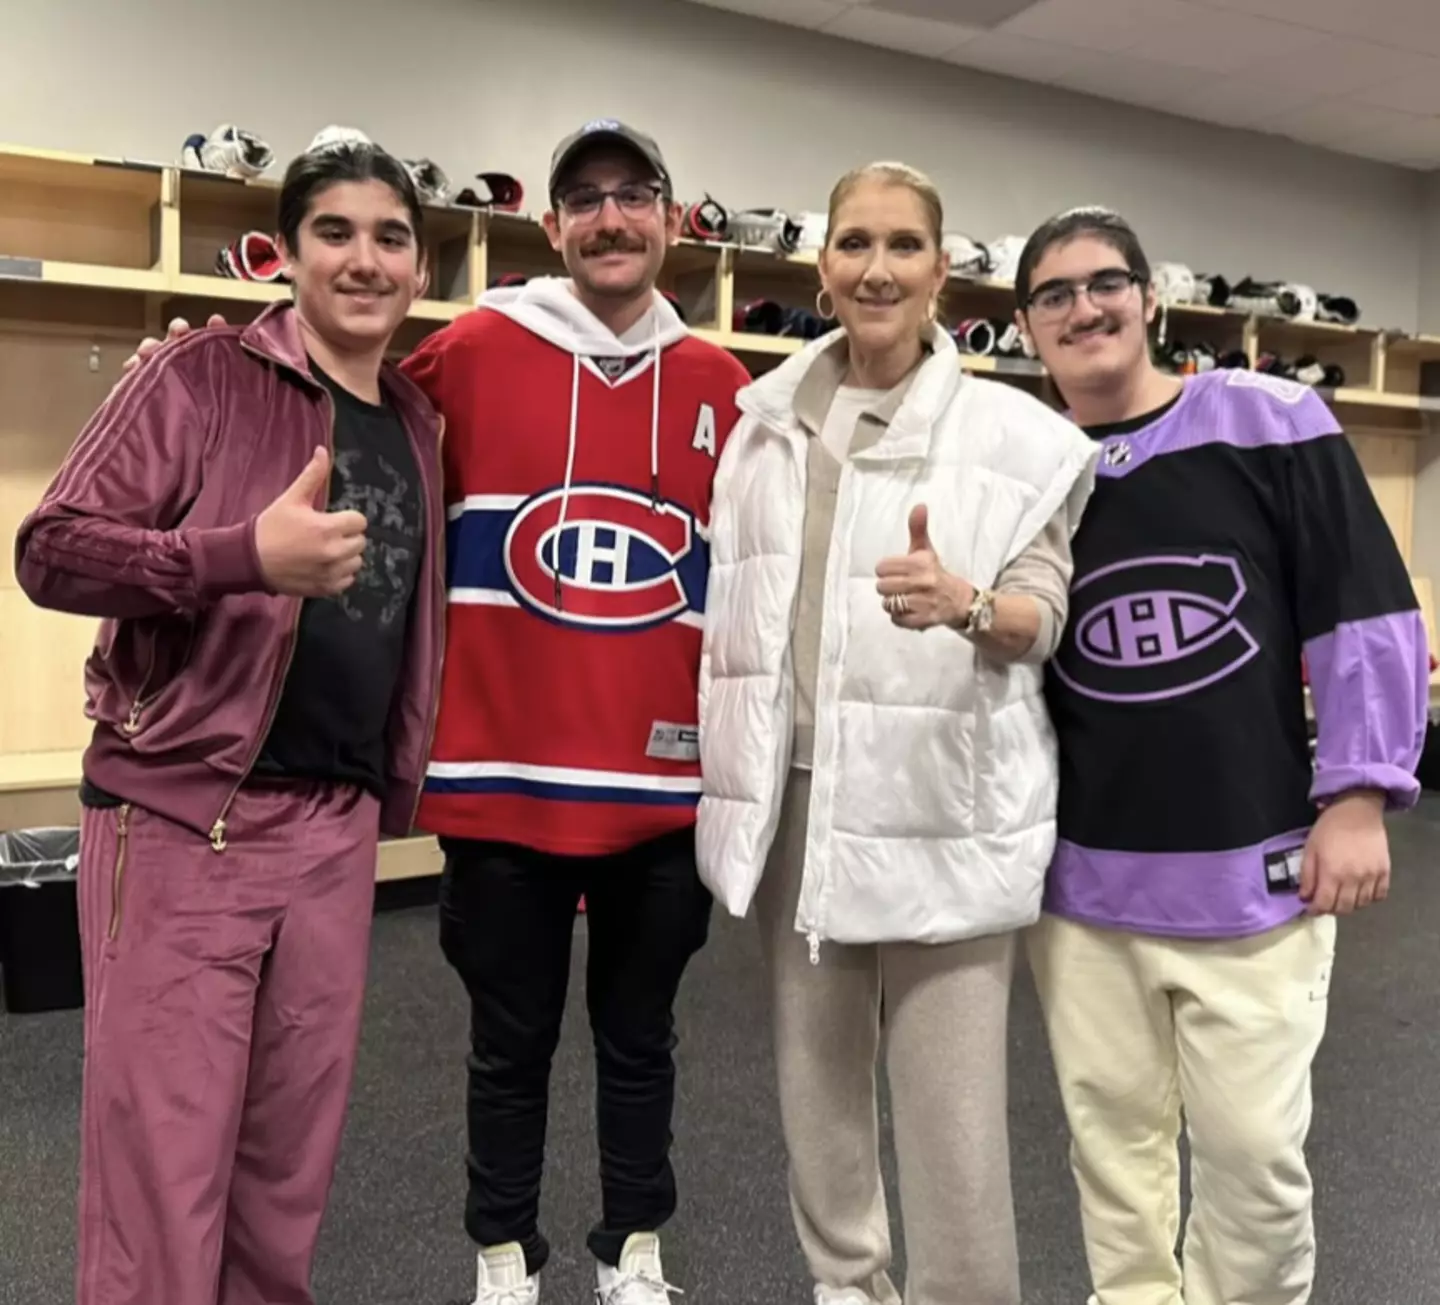 The singer made a rare public appearance at a Montreal hockey match.